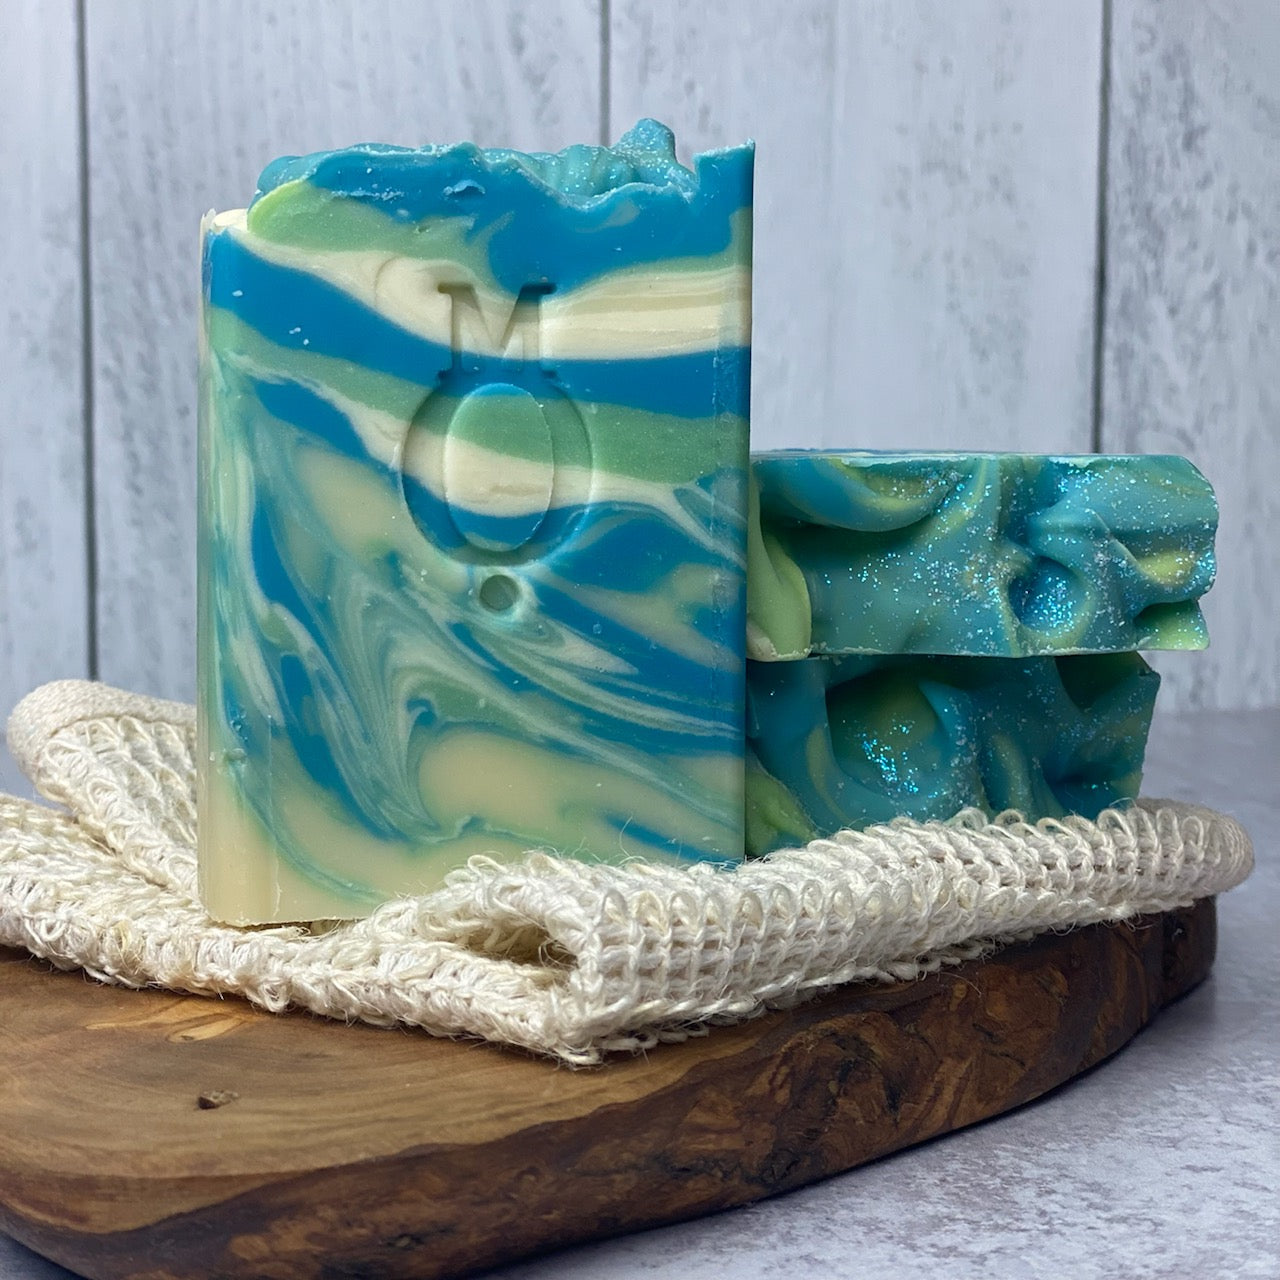 Winter Solstice Handcrafted Soap